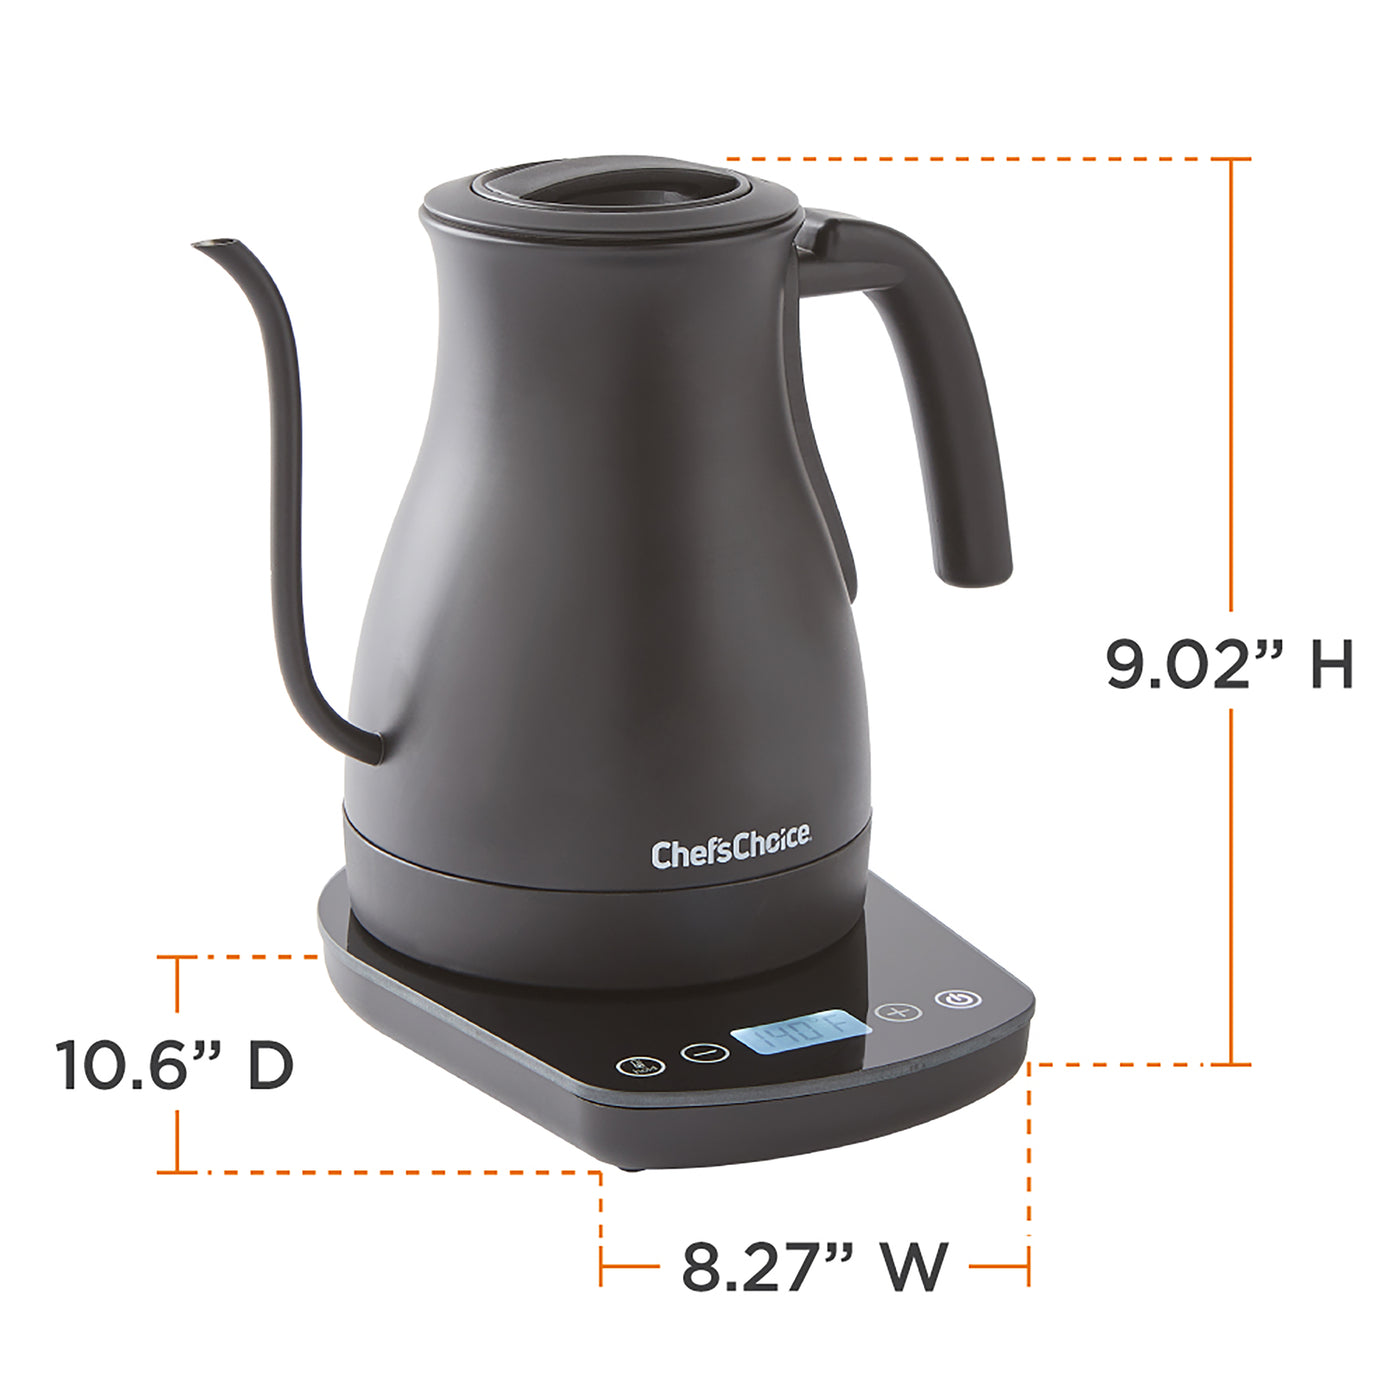 Boil water to the exact degree with the 1200 watt Chef'sChoice